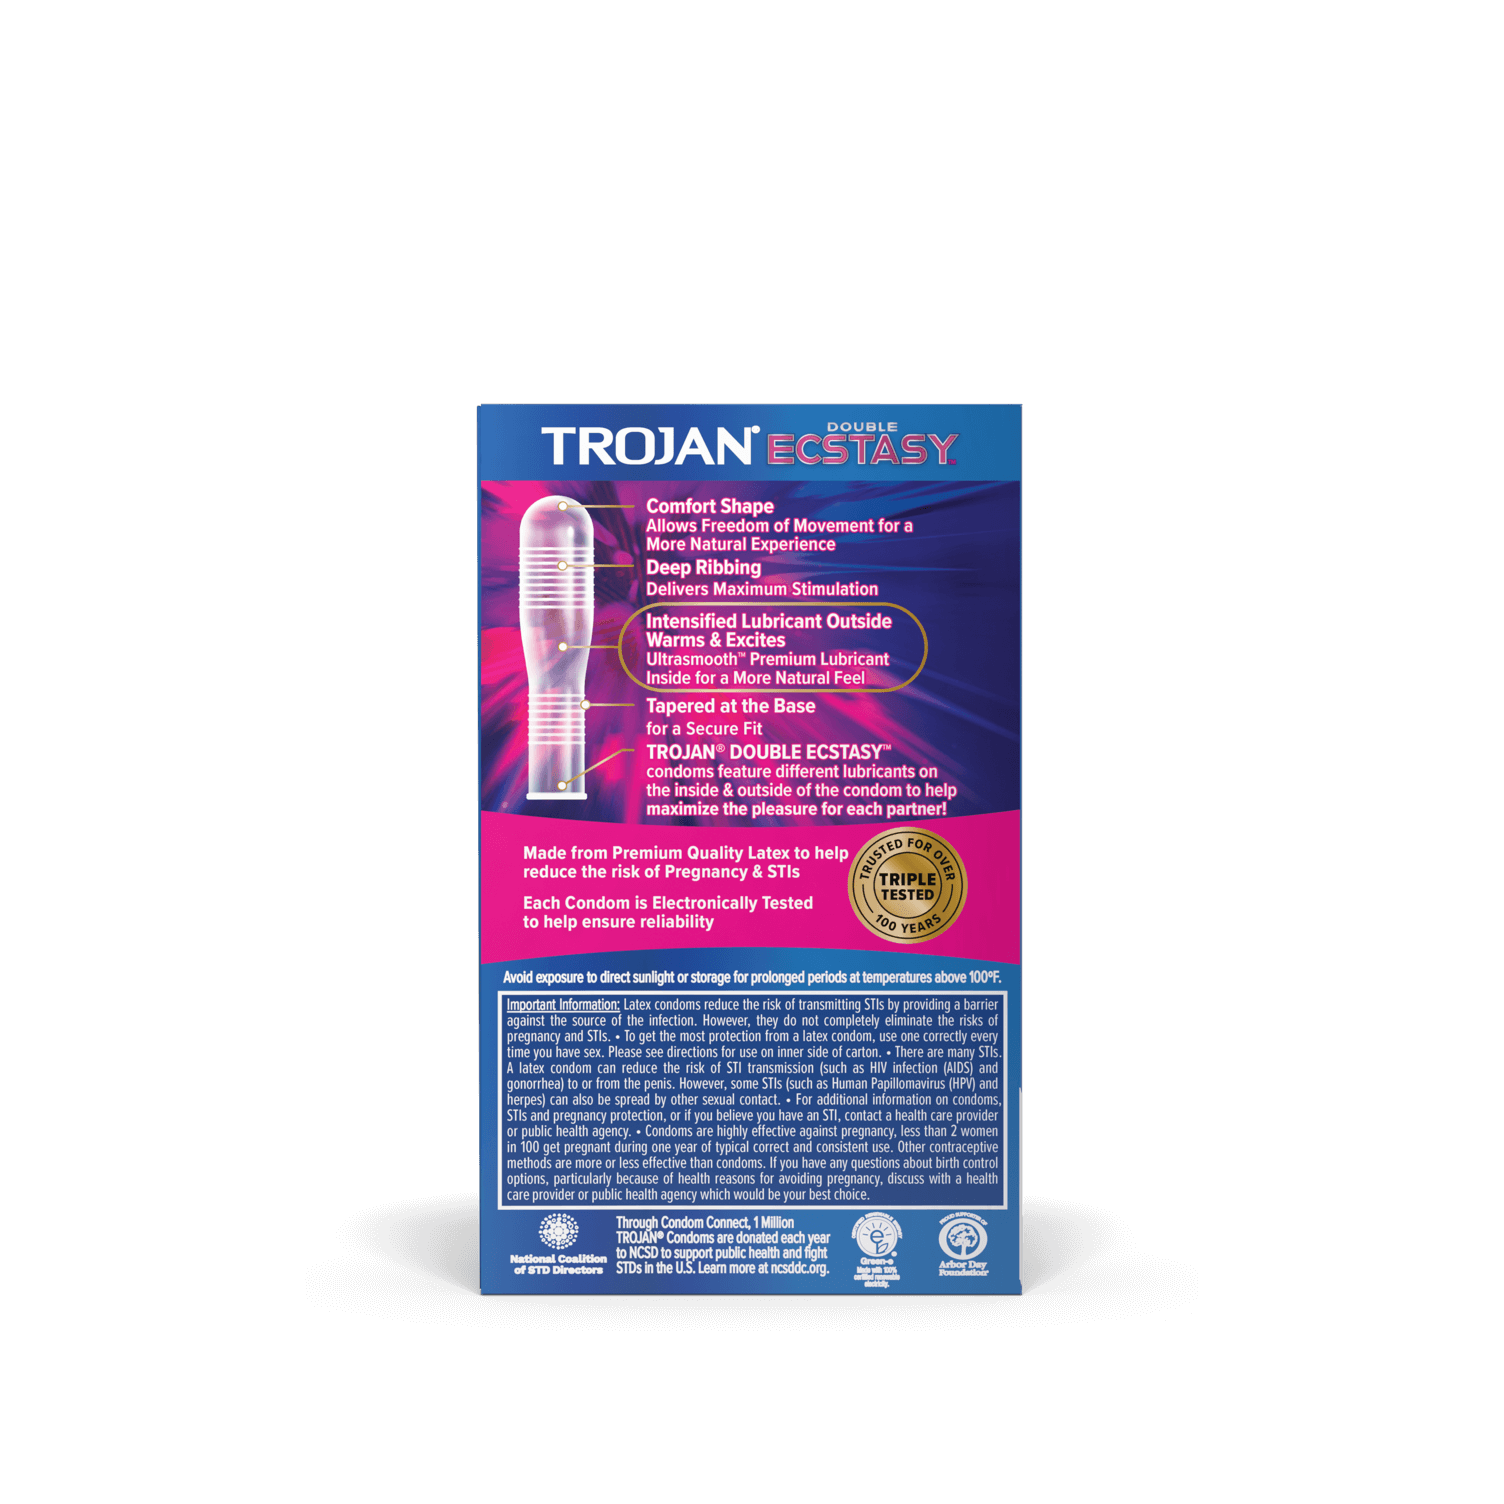 Trojan Double Ecstasy double-lubricated condom back of package.